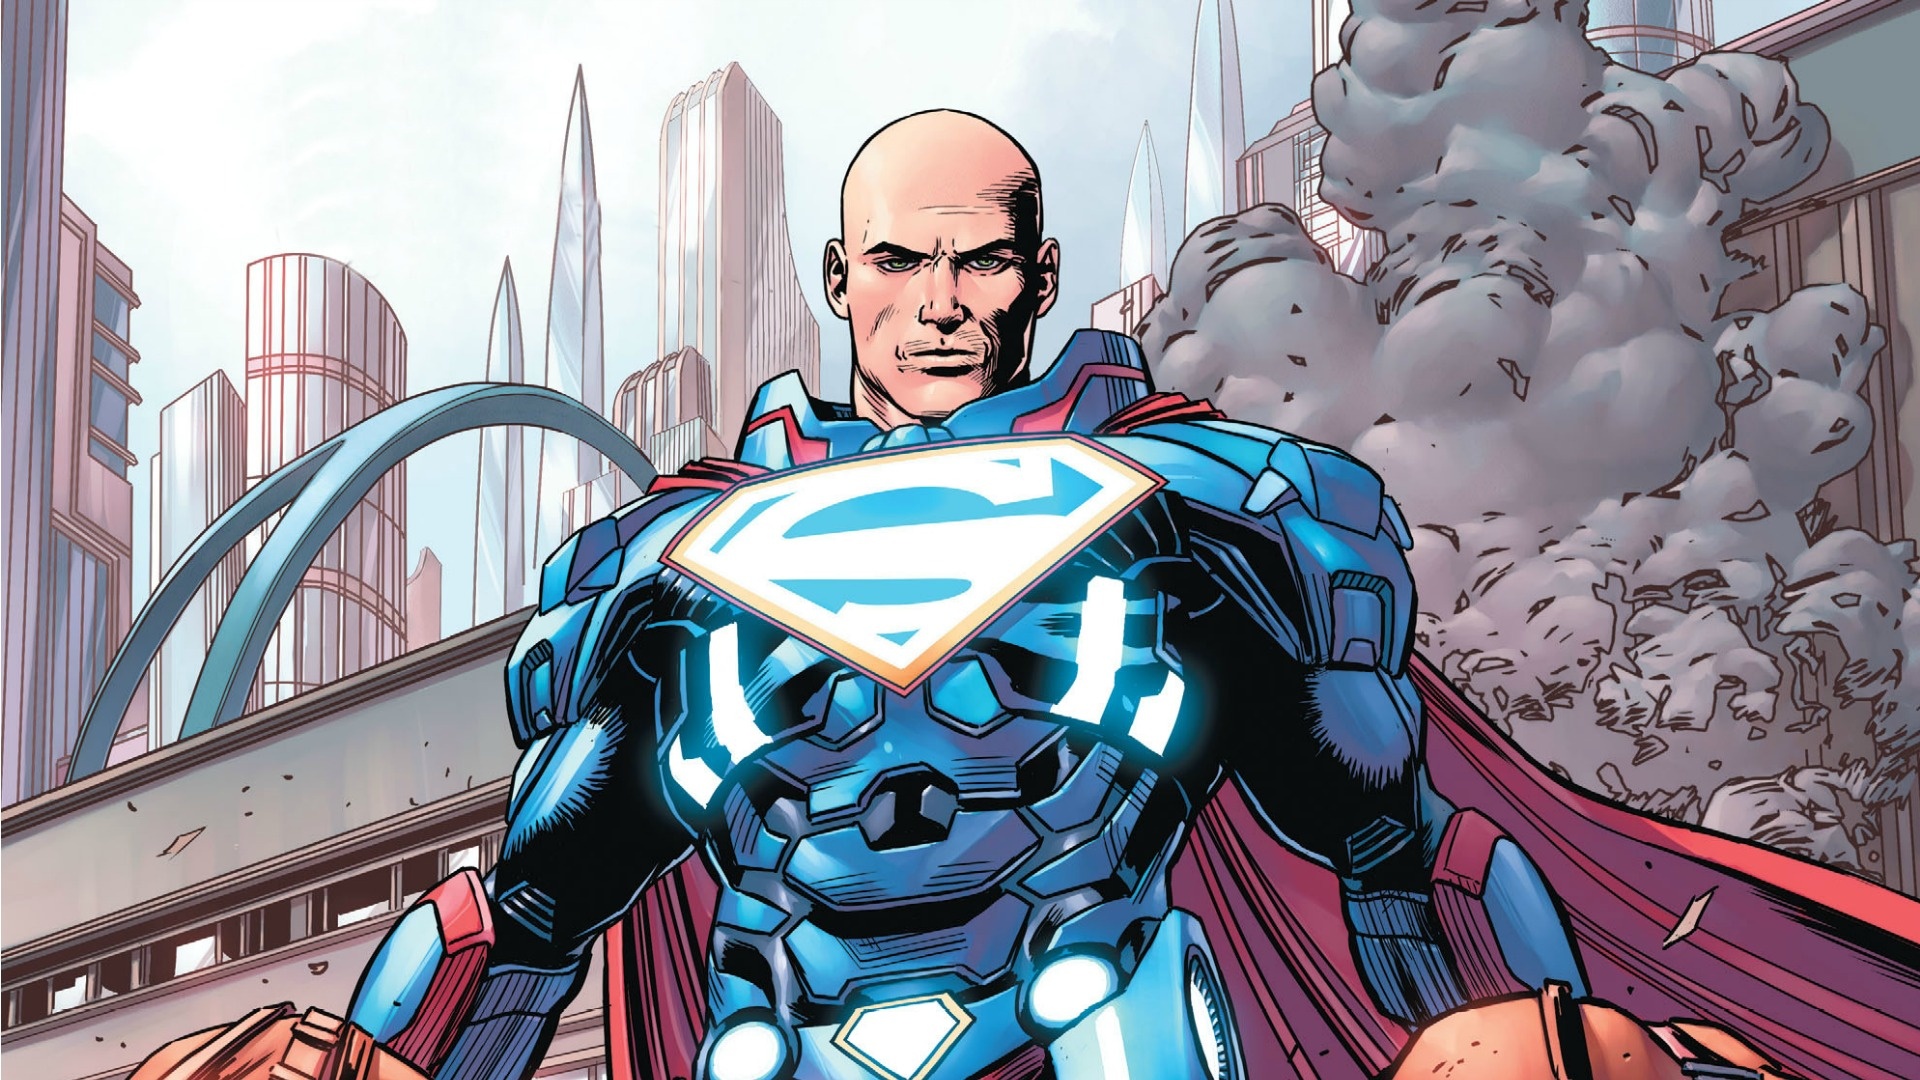 Lex Luthor: The character was created in 1940 as nemesis of Superman. 1920x1080 Full HD Background.